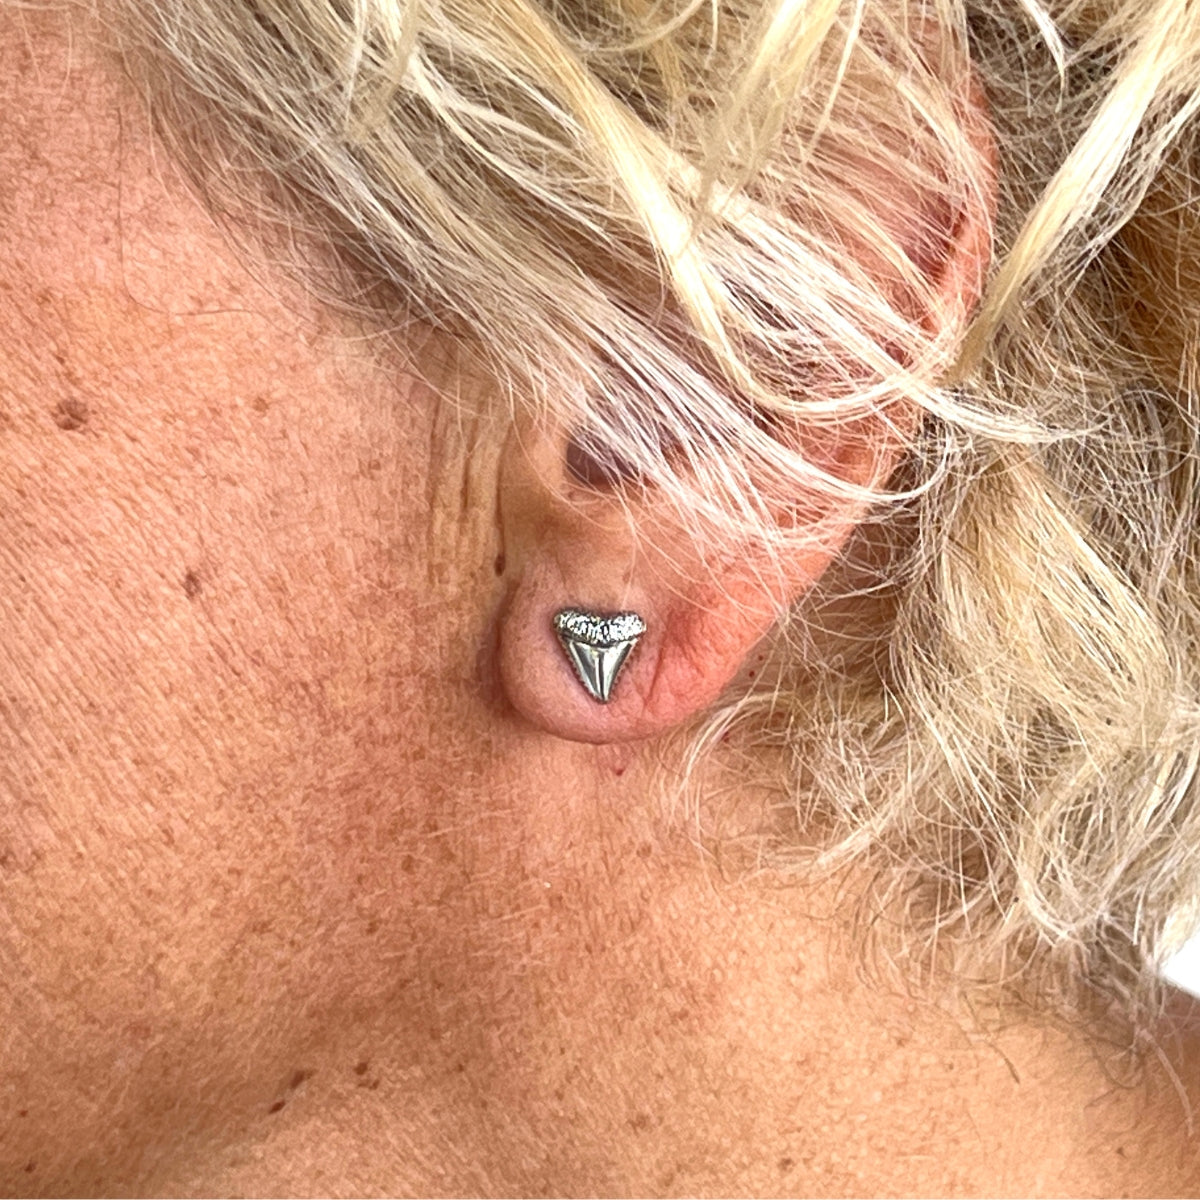 These sterling silver shark tooth post earrings are more than just a fashion statement for beach lovers and surfers. They are also amulets of protection, believed to bring good fortune and ward away evil spirits. According to Hawaiian legends, a young warrior wore shark teeth jewelry after diving into the sea and defeating sea gods.